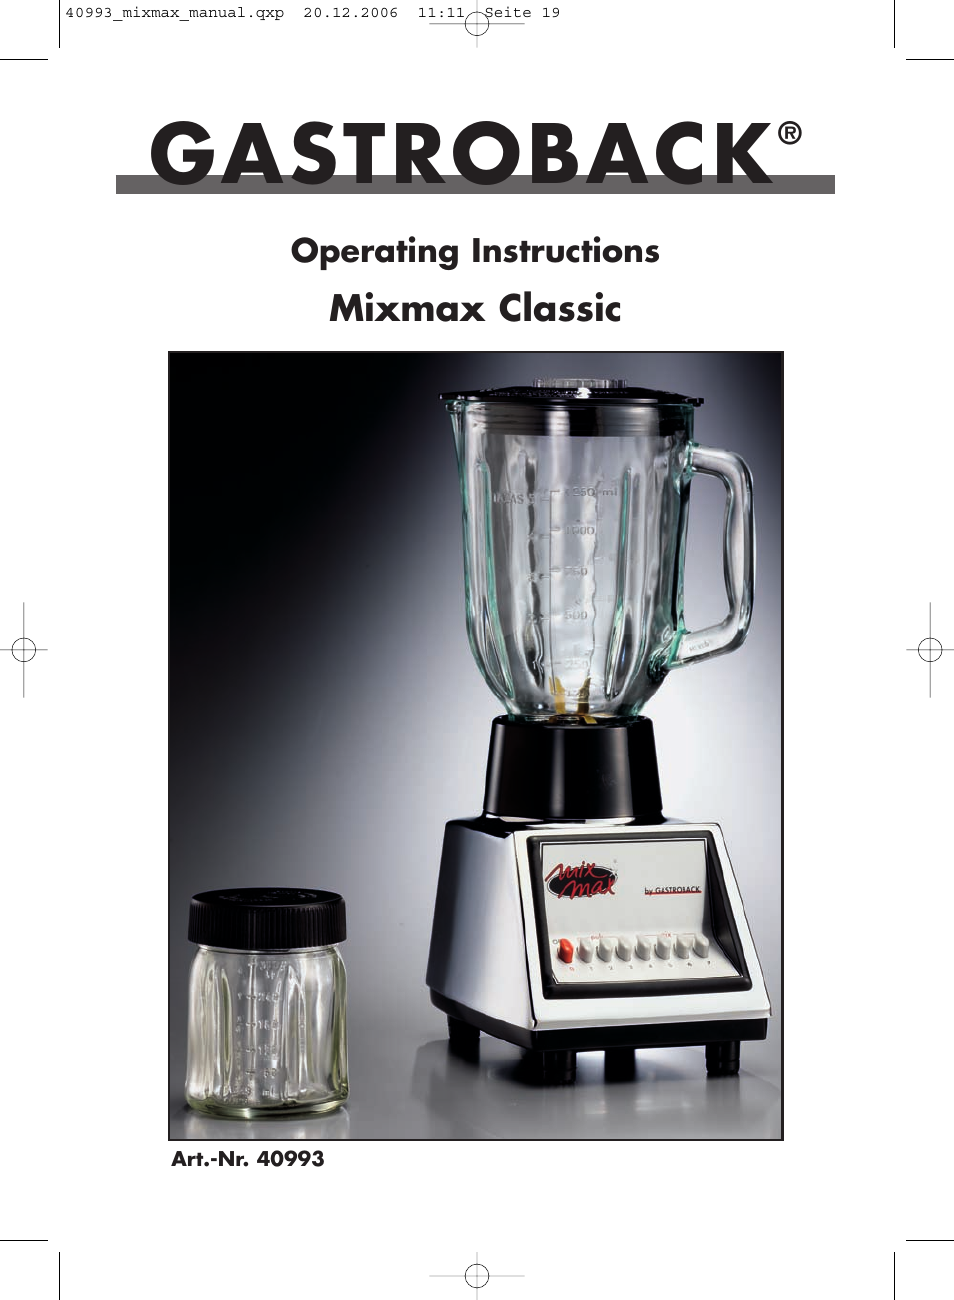 Gastroback 40993 MIXMAX Multi-function mixer User Manual | 18 pages